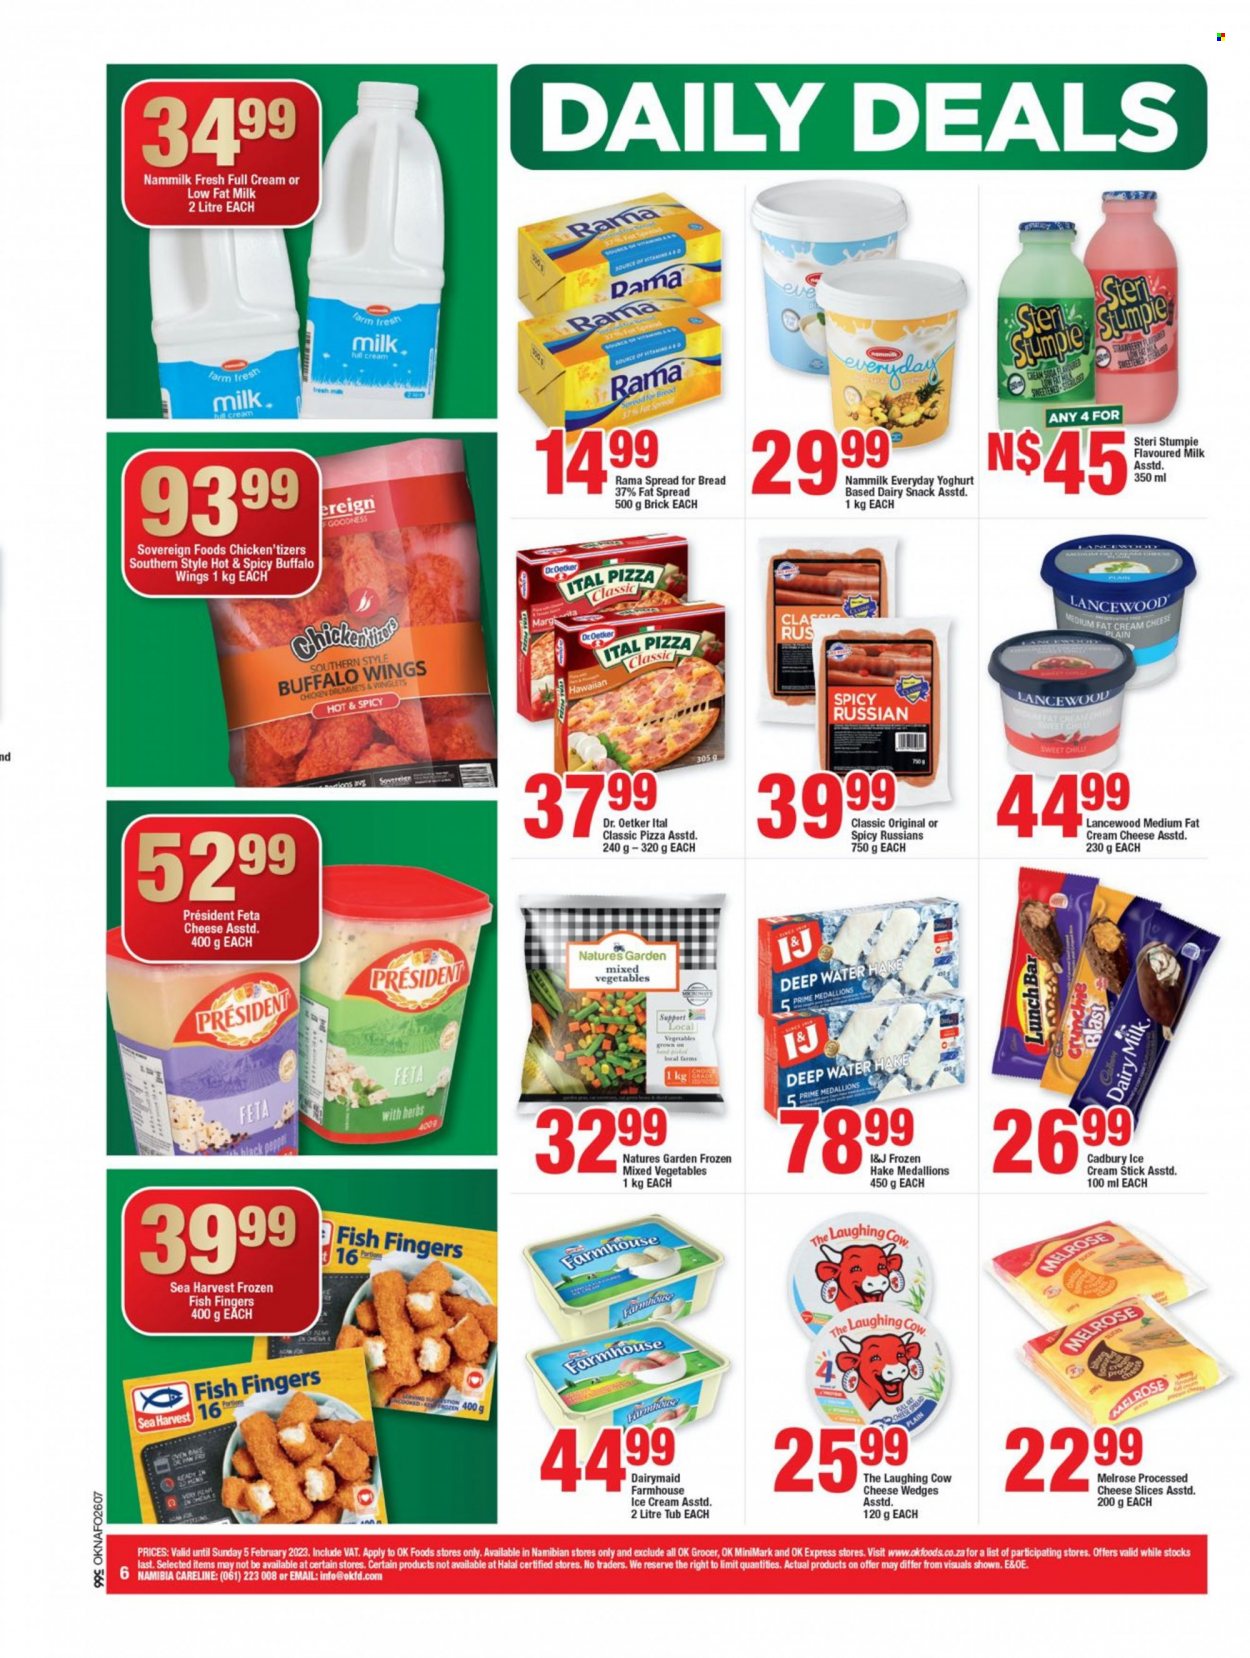 thumbnail - OK catalogue  - 20/01/2023 - 05/02/2023 - Sales products - bread, hake, fish, fish fingers, Sea Harvest, fish sticks, pizza, Russians, cream cheese, sliced cheese, The Laughing Cow, Dr. Oetker, Lancewood, Président, feta, Melrose, yoghurt, milk, flavoured milk, Steri Stumpie, fat spread, Rama, ice cream, mixed vegetables, Natures Garden, Ital Pizza, snack, Cadbury, black pepper. Page 6.